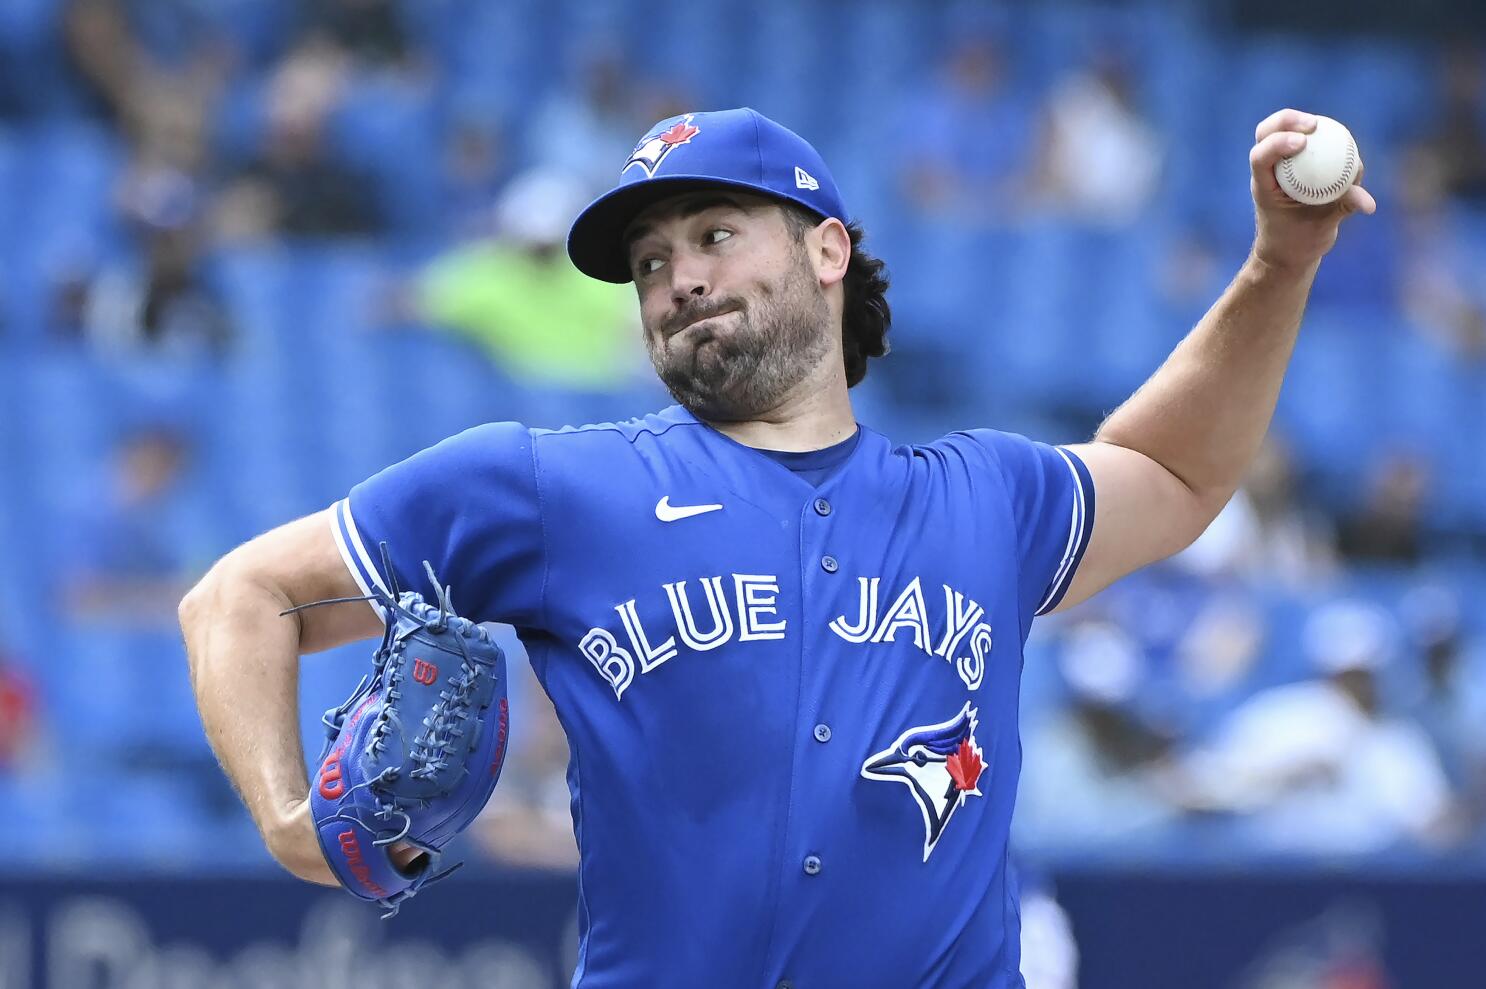 Ray helps Blue Jays win 4th straight by beating Marlins 3-1 - The